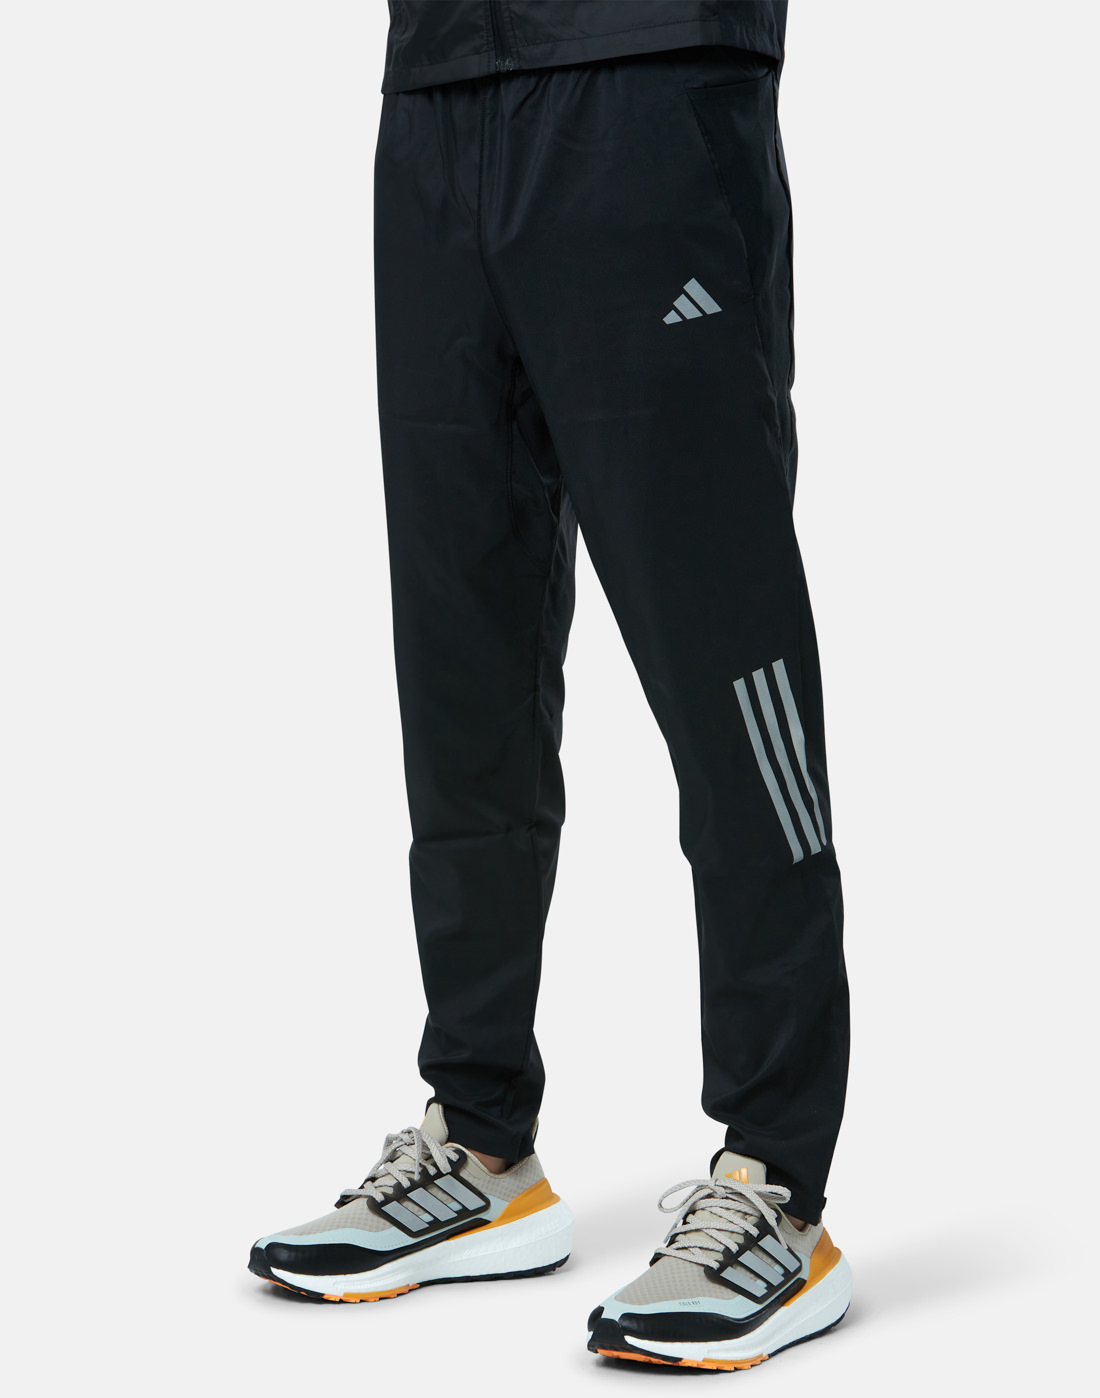 adidas Mens Own the Run Woven Pants - Black | Life Style Sports IE